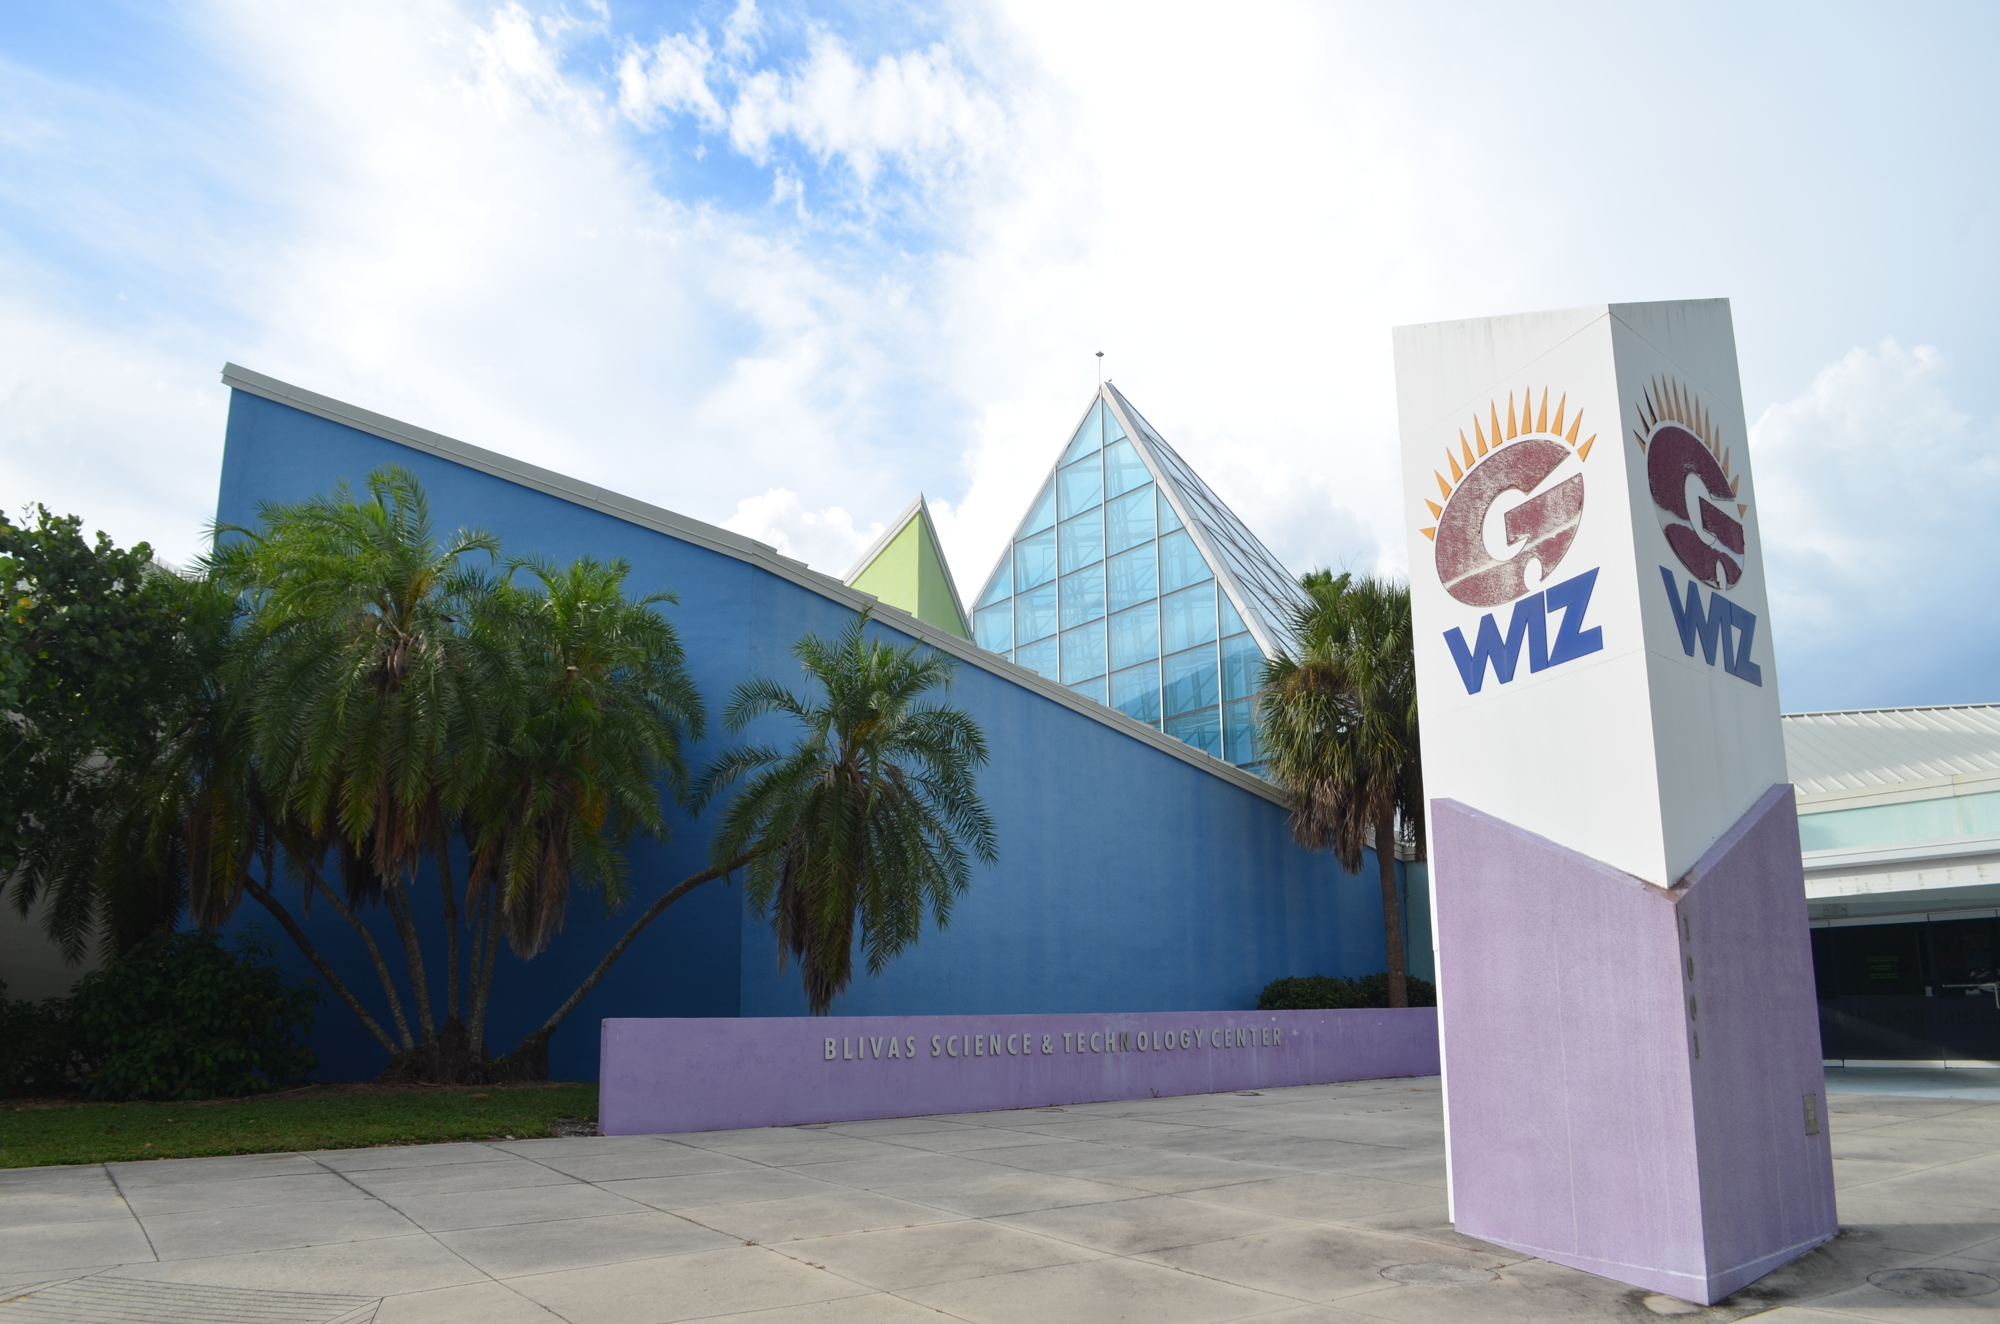 The GWIZ building has been without a tenant since 2013.